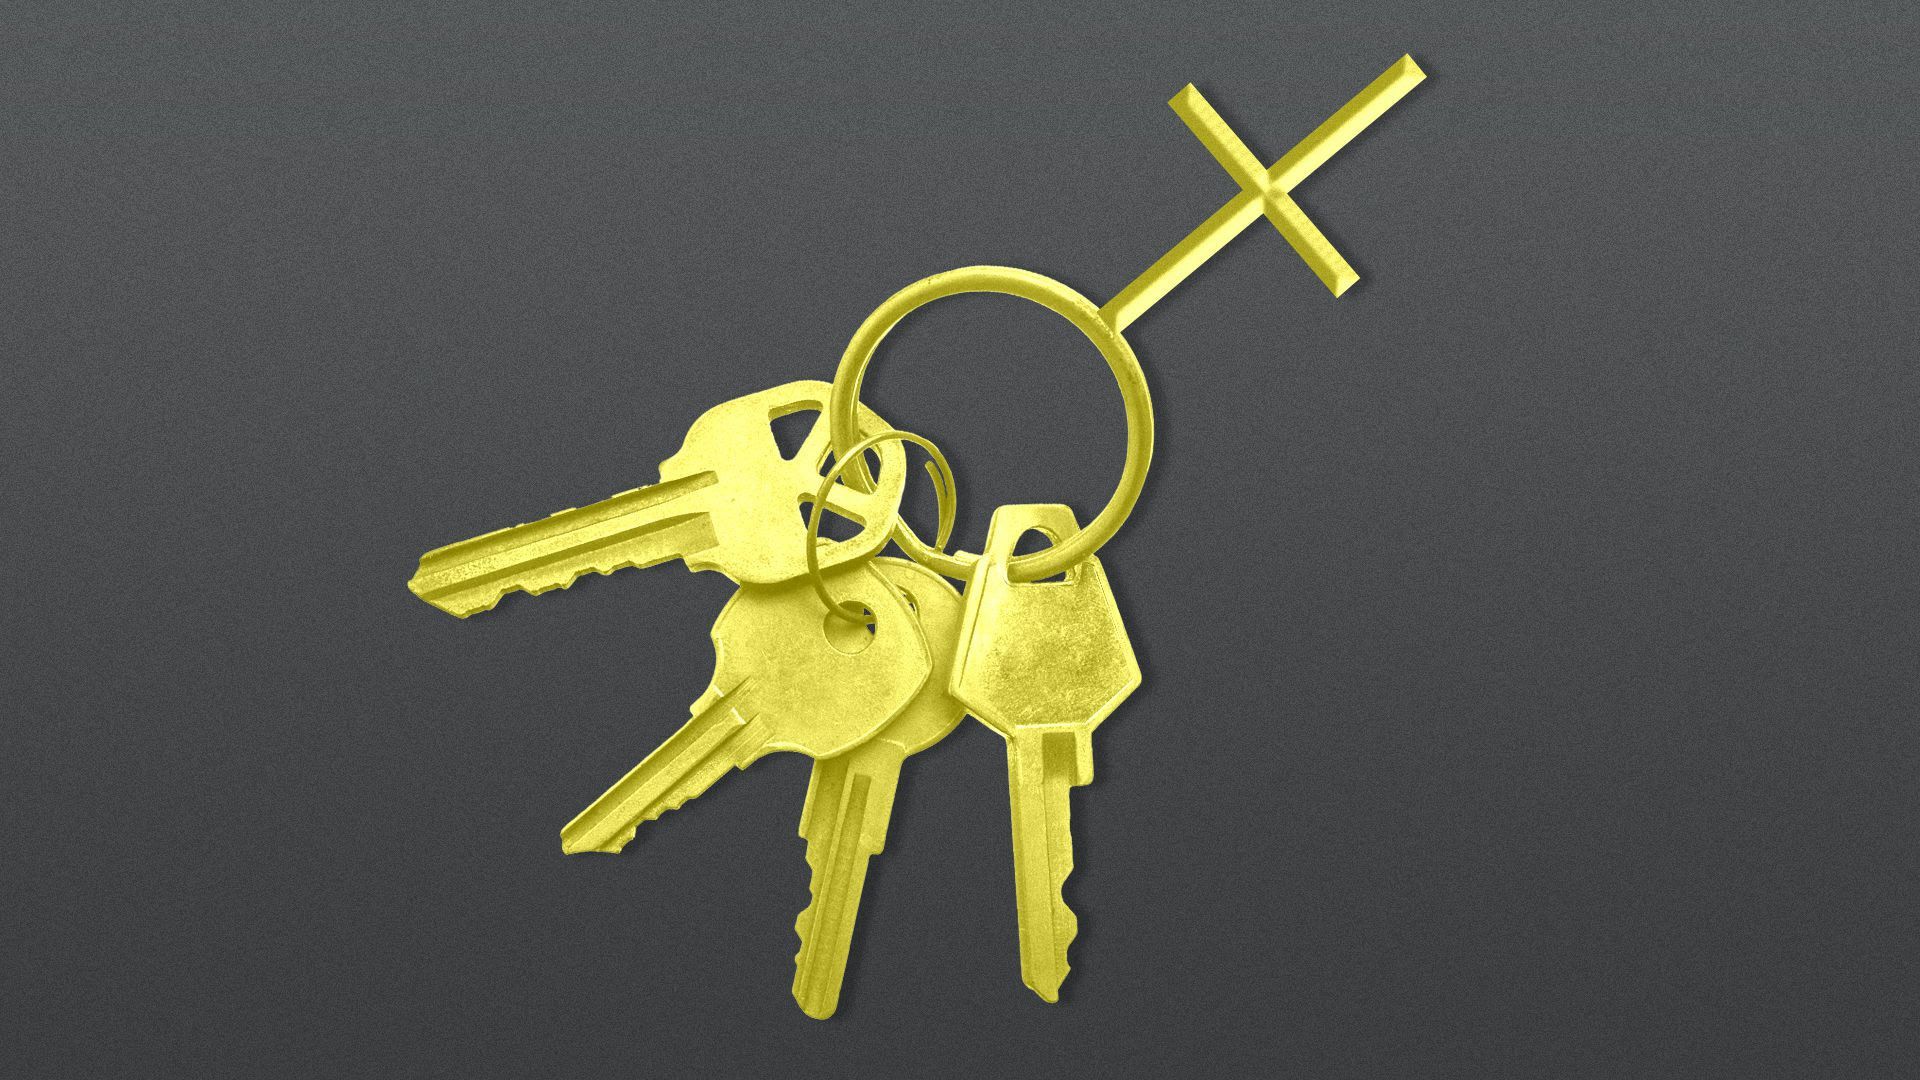 graphic of gold colored keys on key ring made from the female gender symbol.